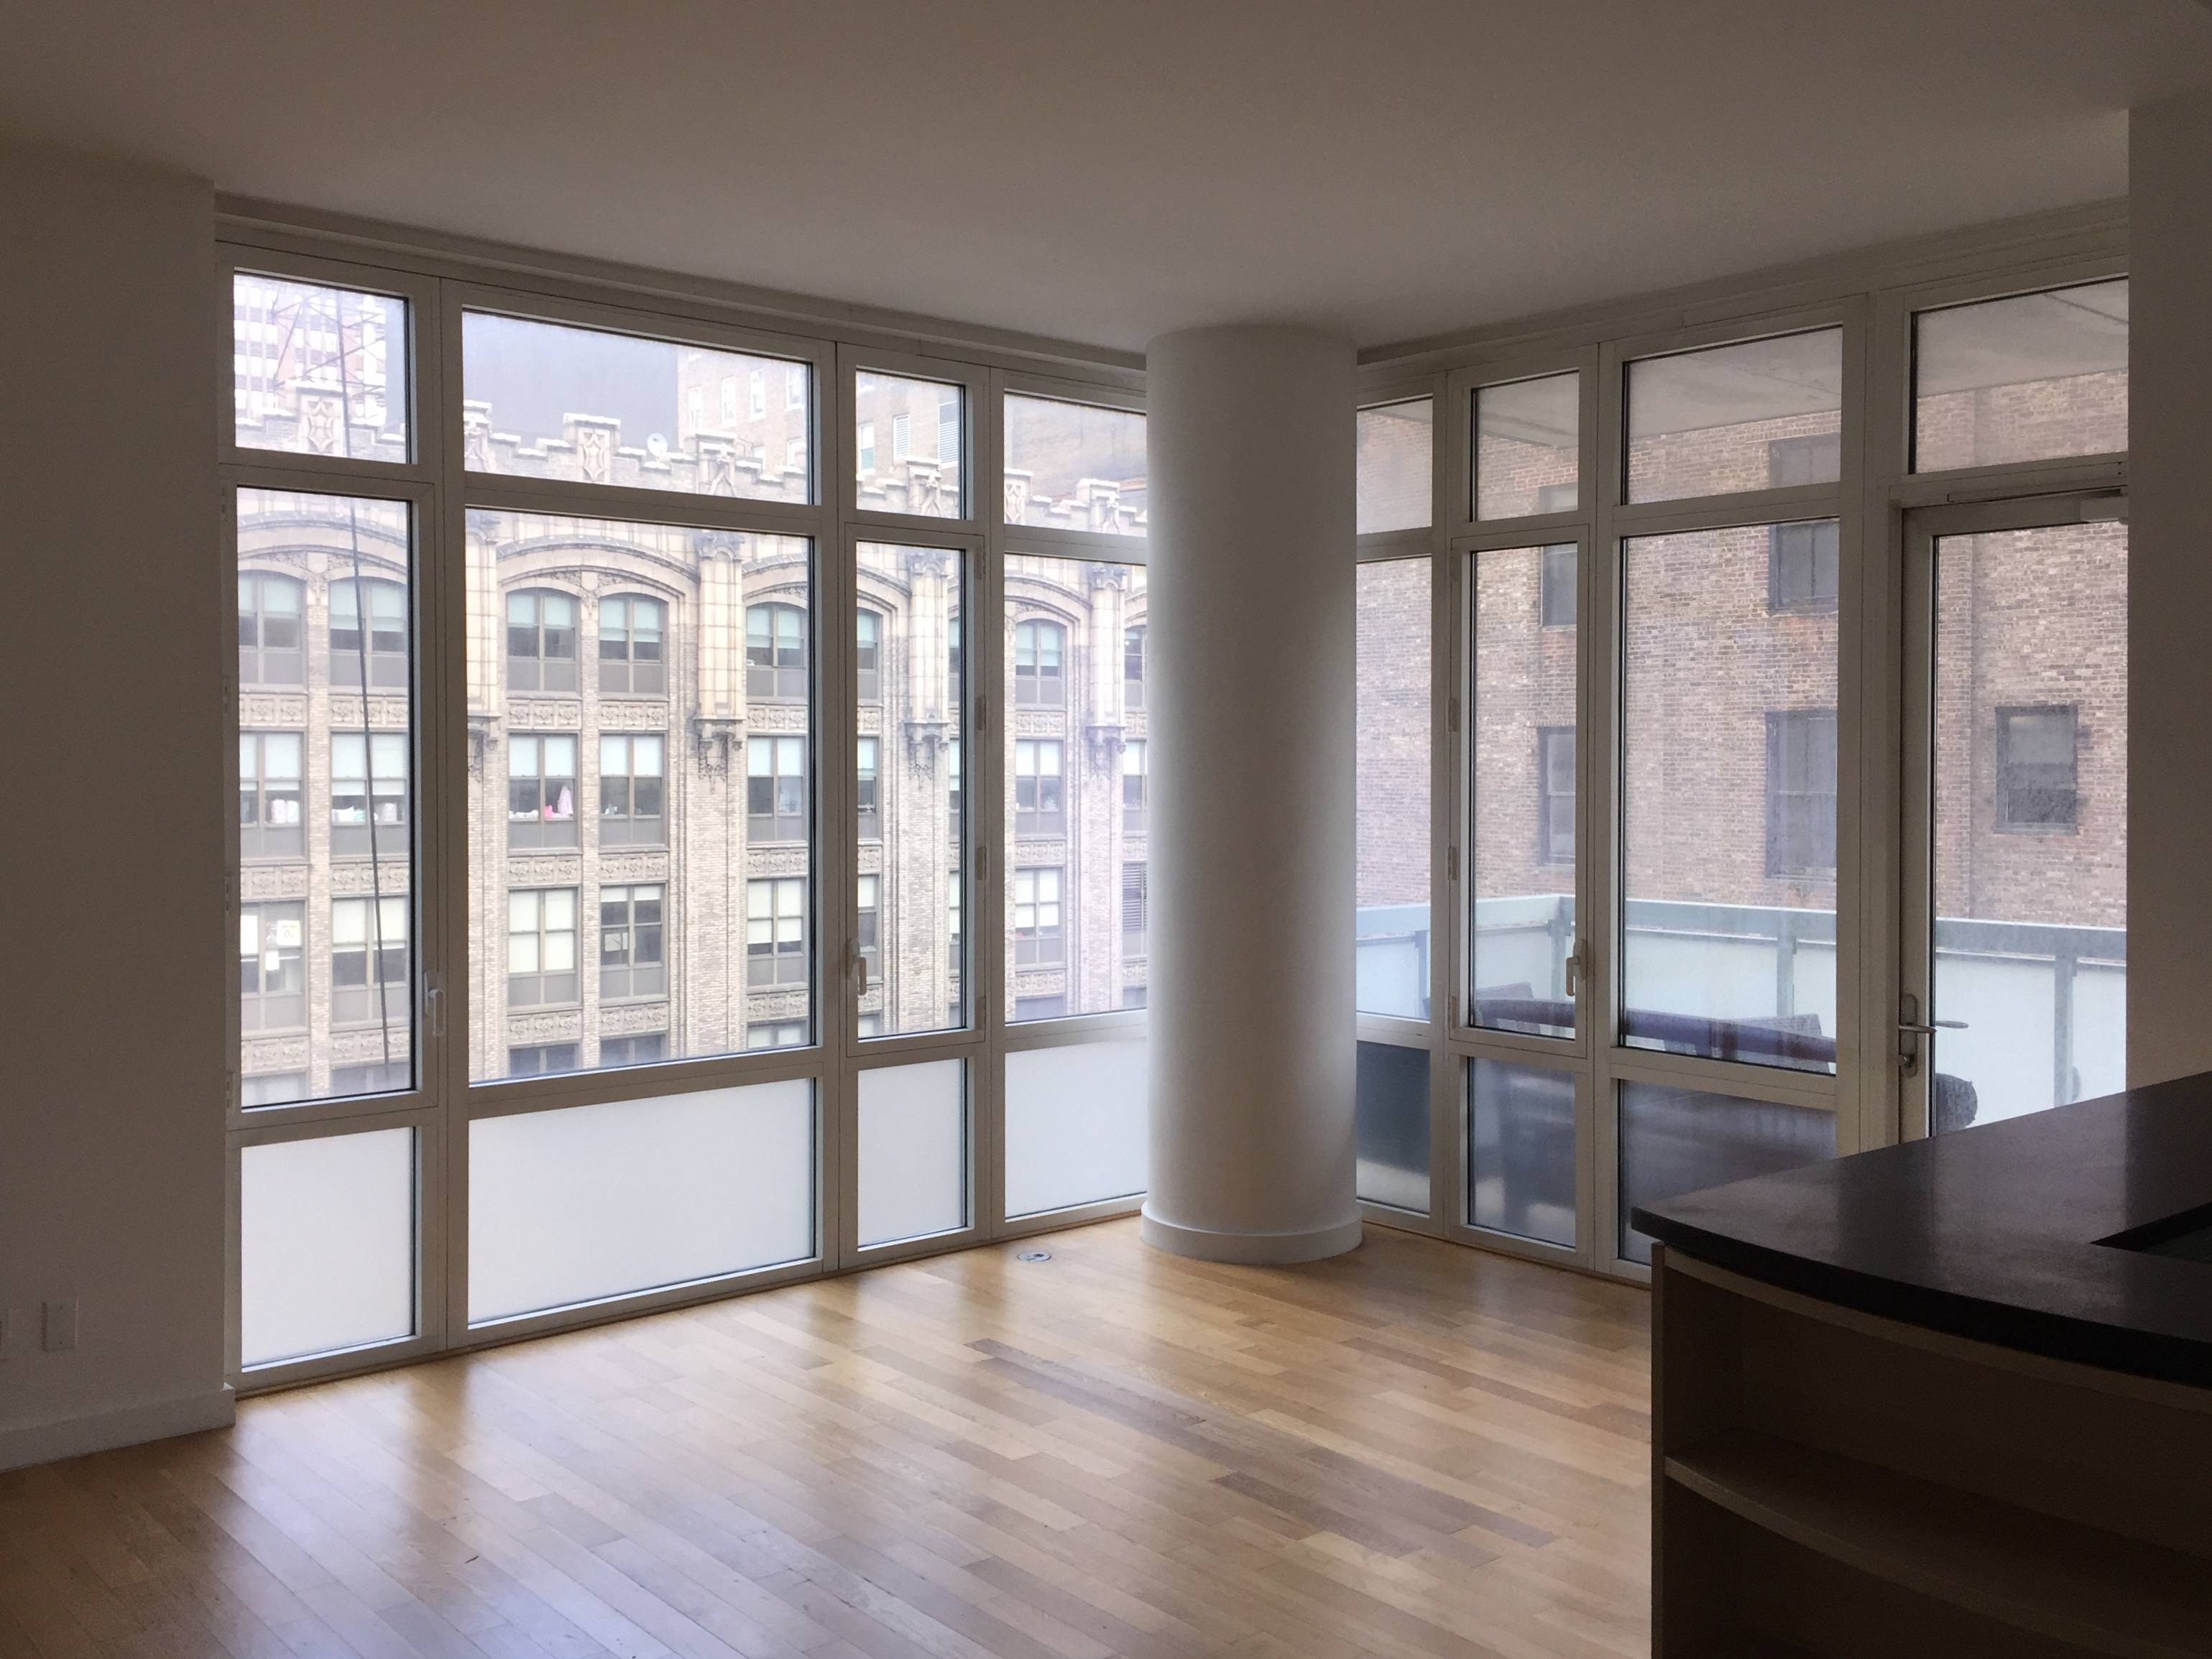 NEW TO MARKET - 325 FIFTH AVENUE, #17D - 1 BEDROOM,  BATH WITH BALCONY